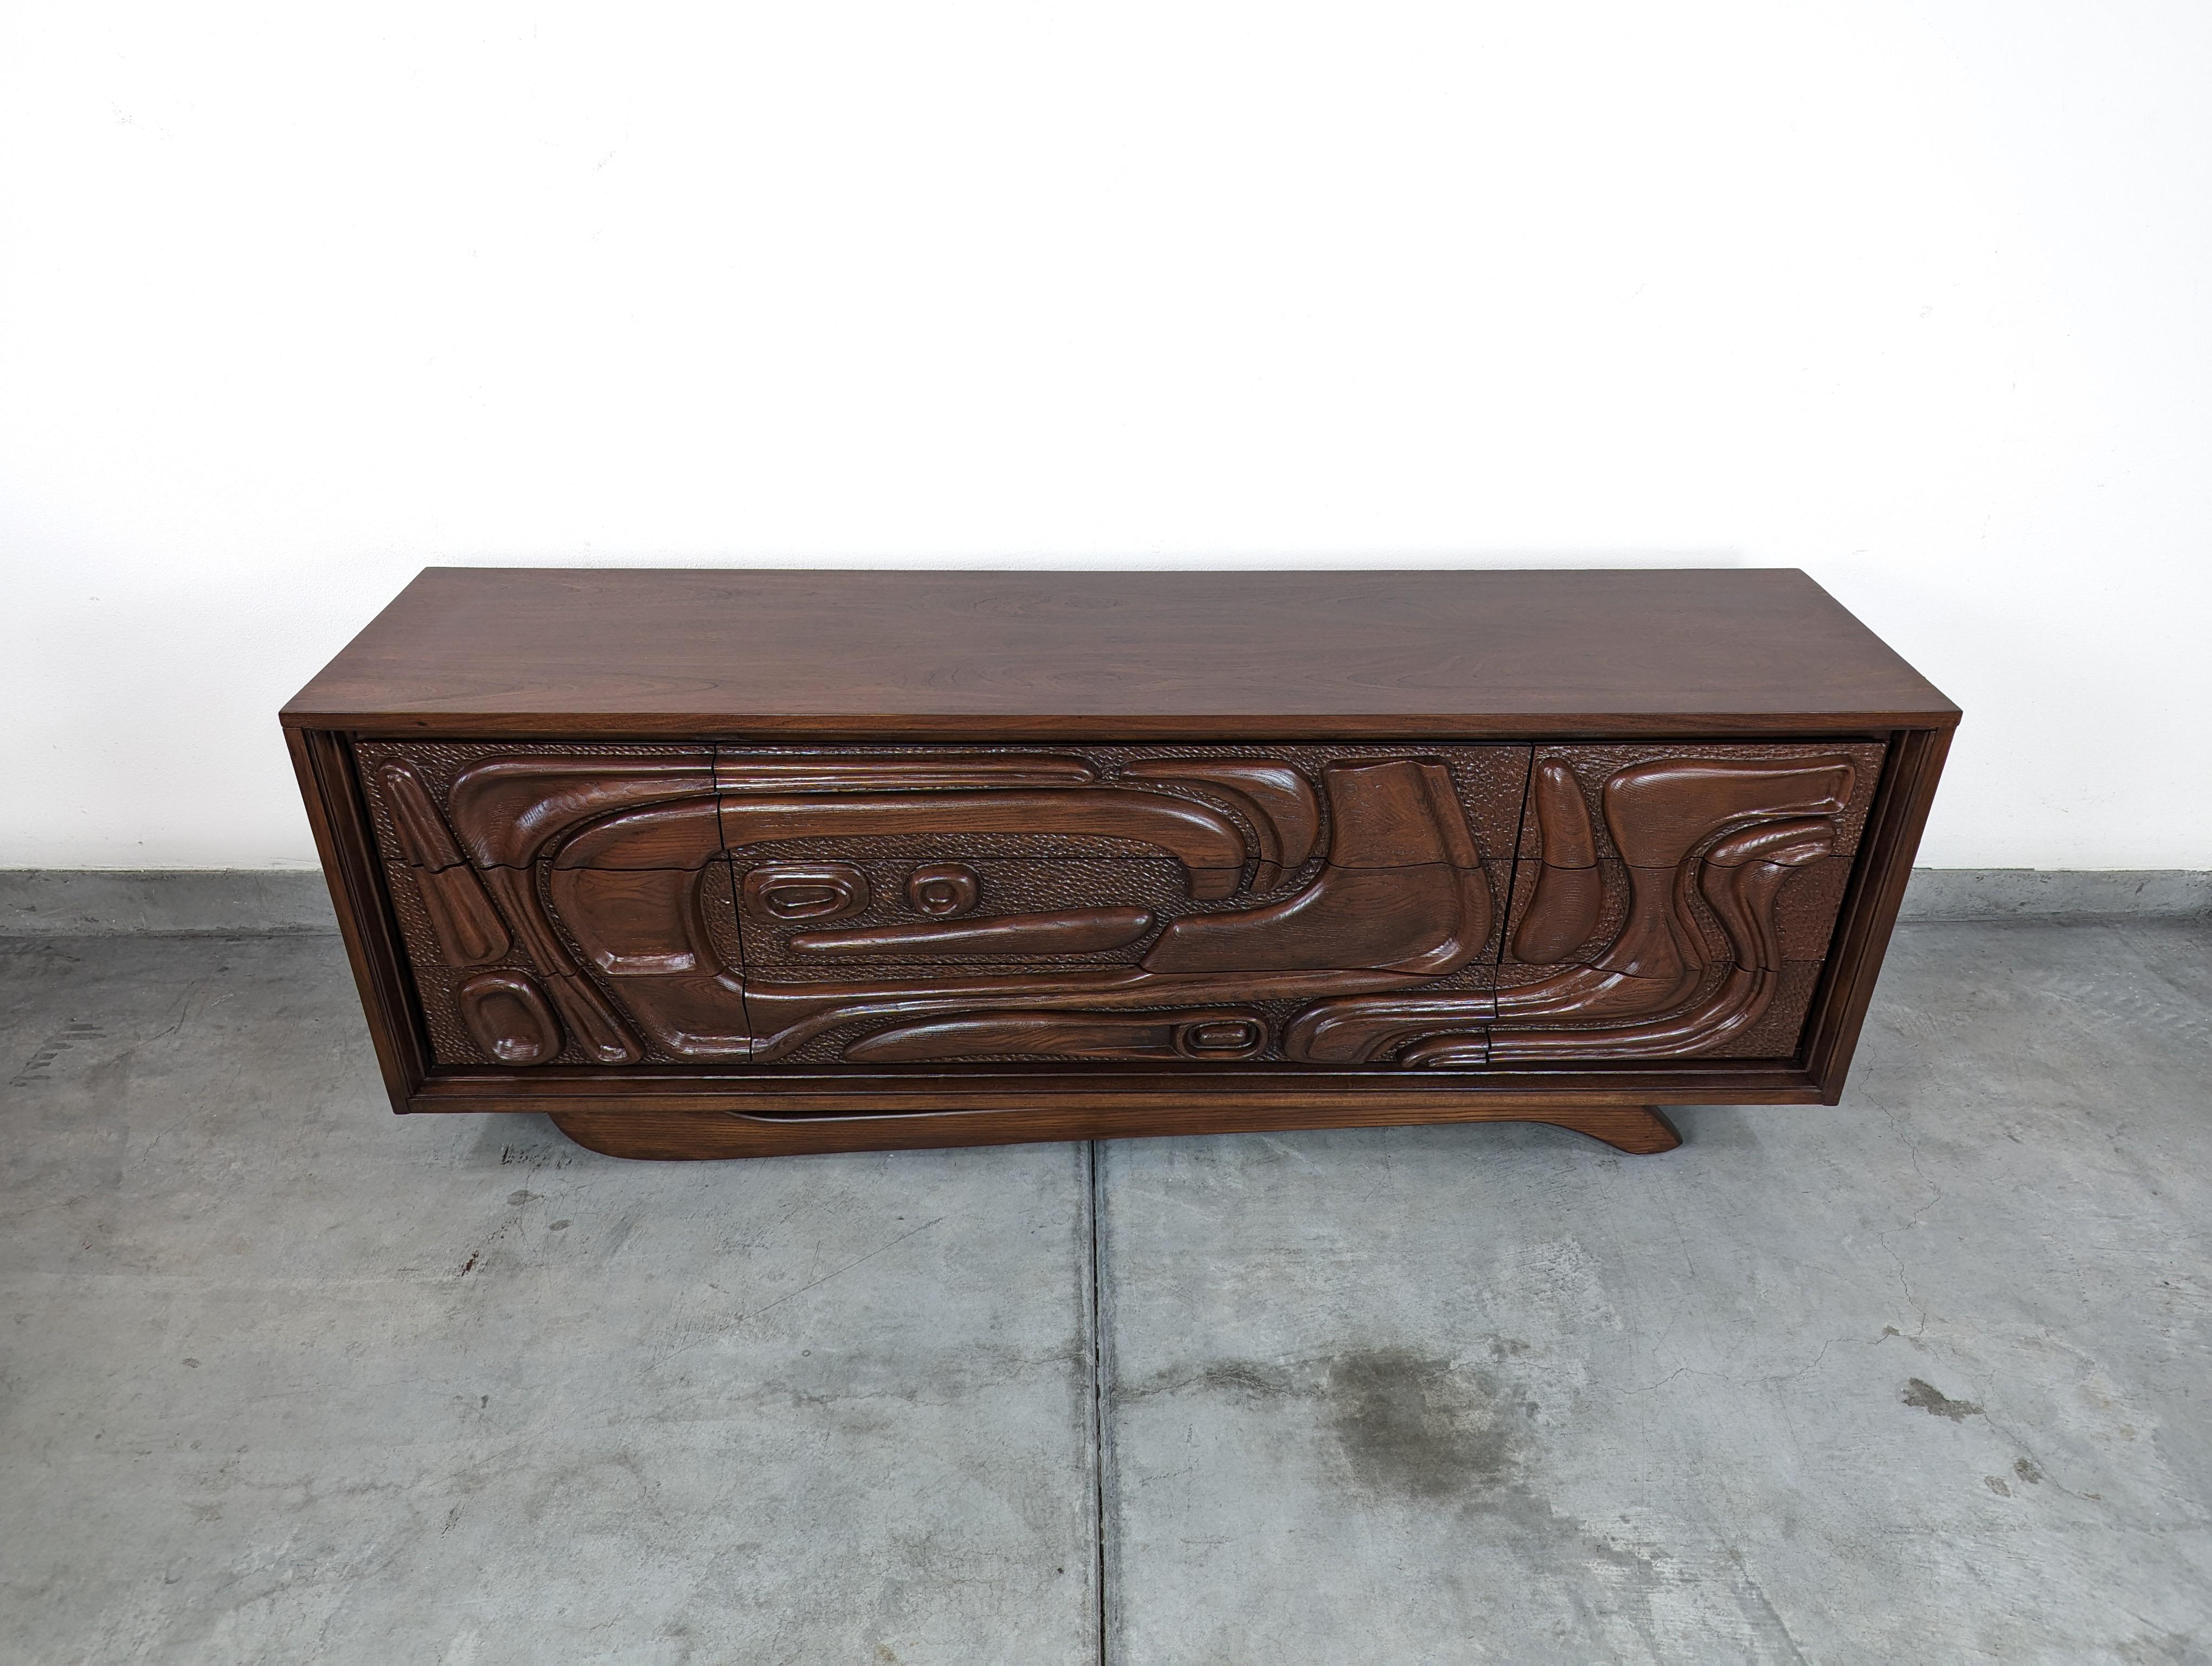 Immerse yourself in the nostalgic allure of the Californian surf culture with this exquisite vintage mid-century 'Oceanic' sculpted walnut dresser by Pulaski Furniture Corporation, dating back to the vibrant 1960s. A treasured relic of the era, this